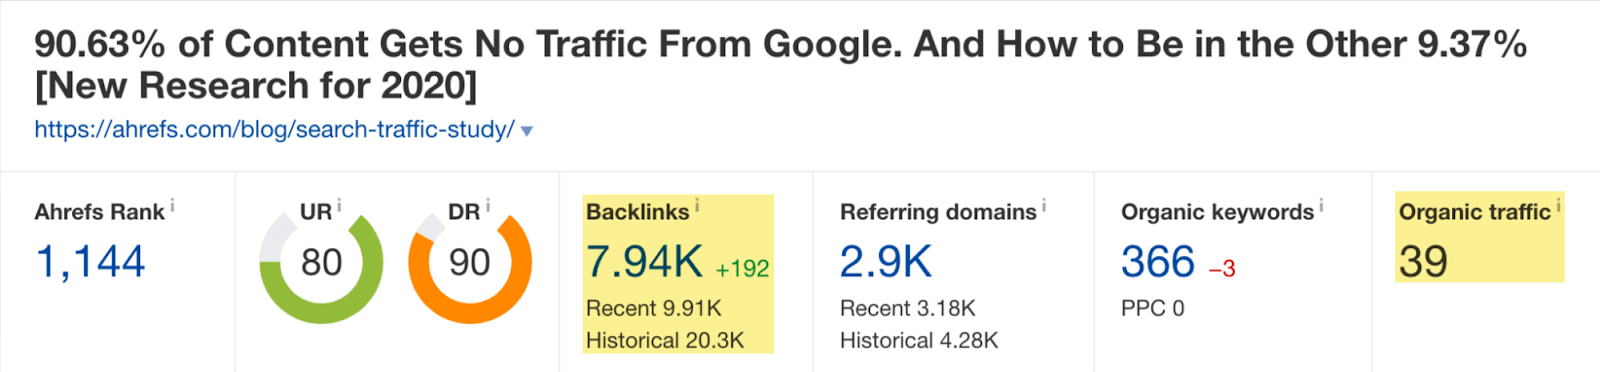 Site Explorer overview of an article about how 90.63% of content gets no traffic from Google and how to be in the minority that does